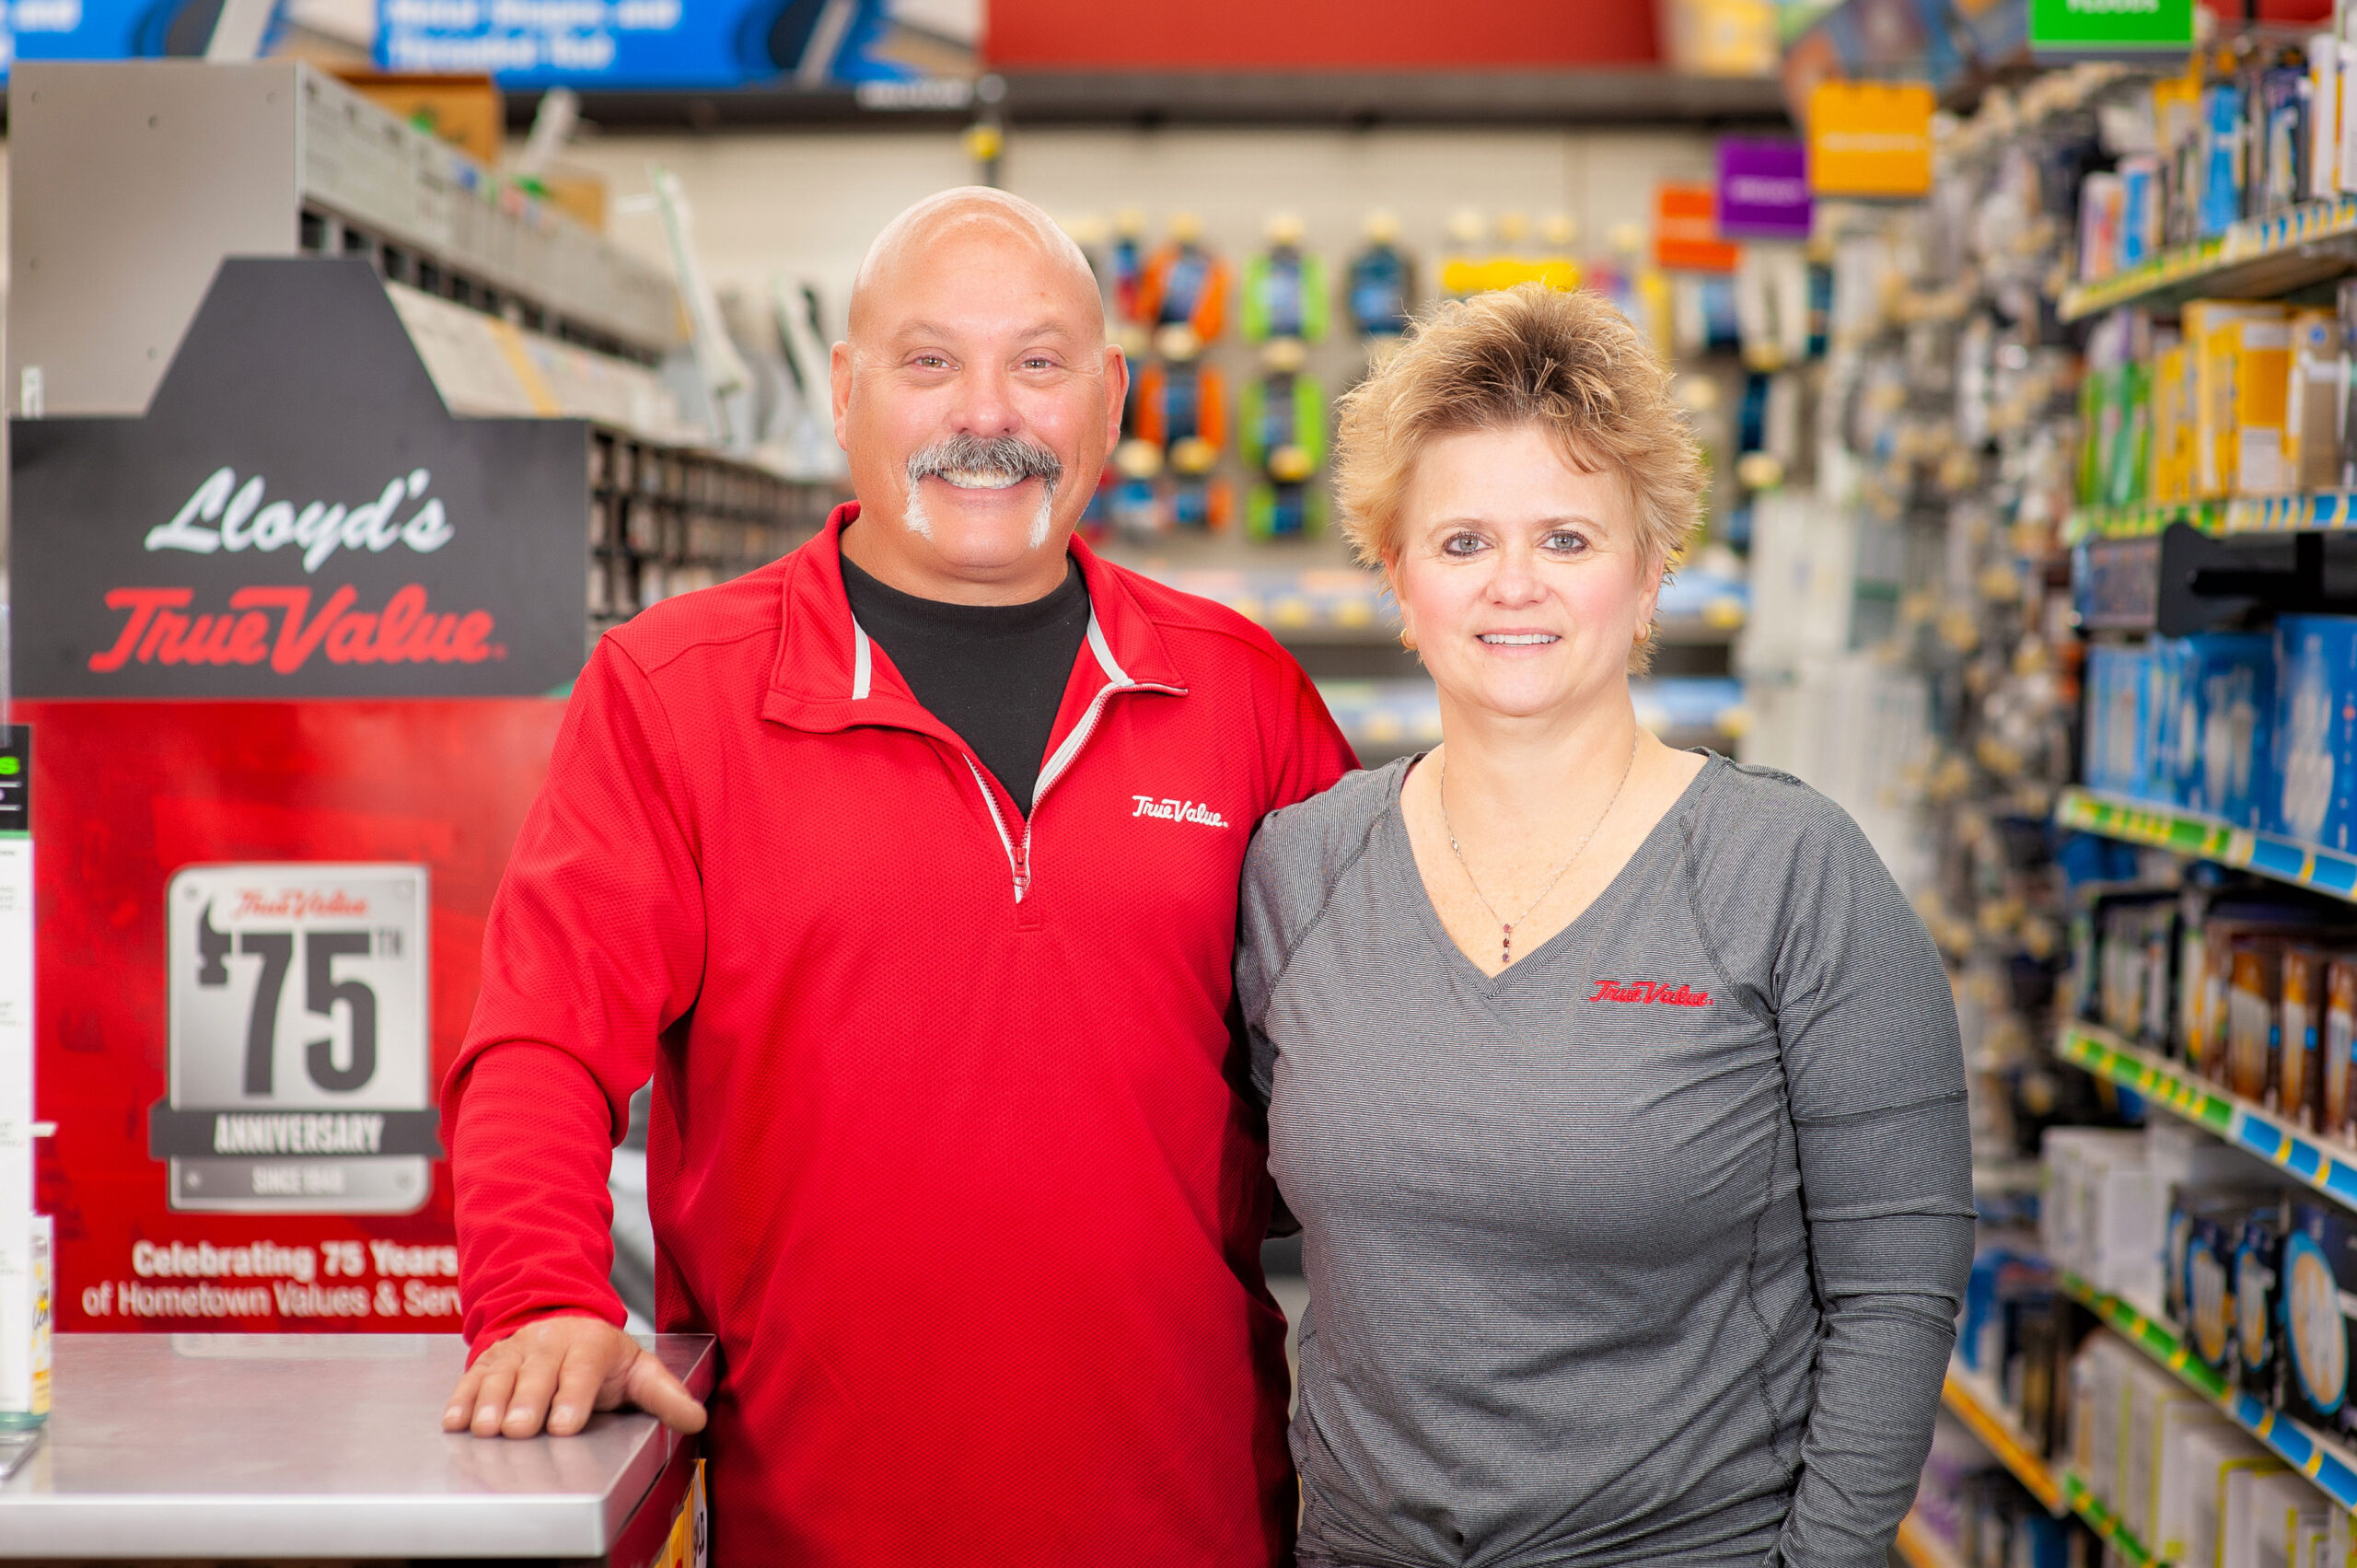 Christopher and Anita Lloyd, owners of Lloyd's True Value in Janesville